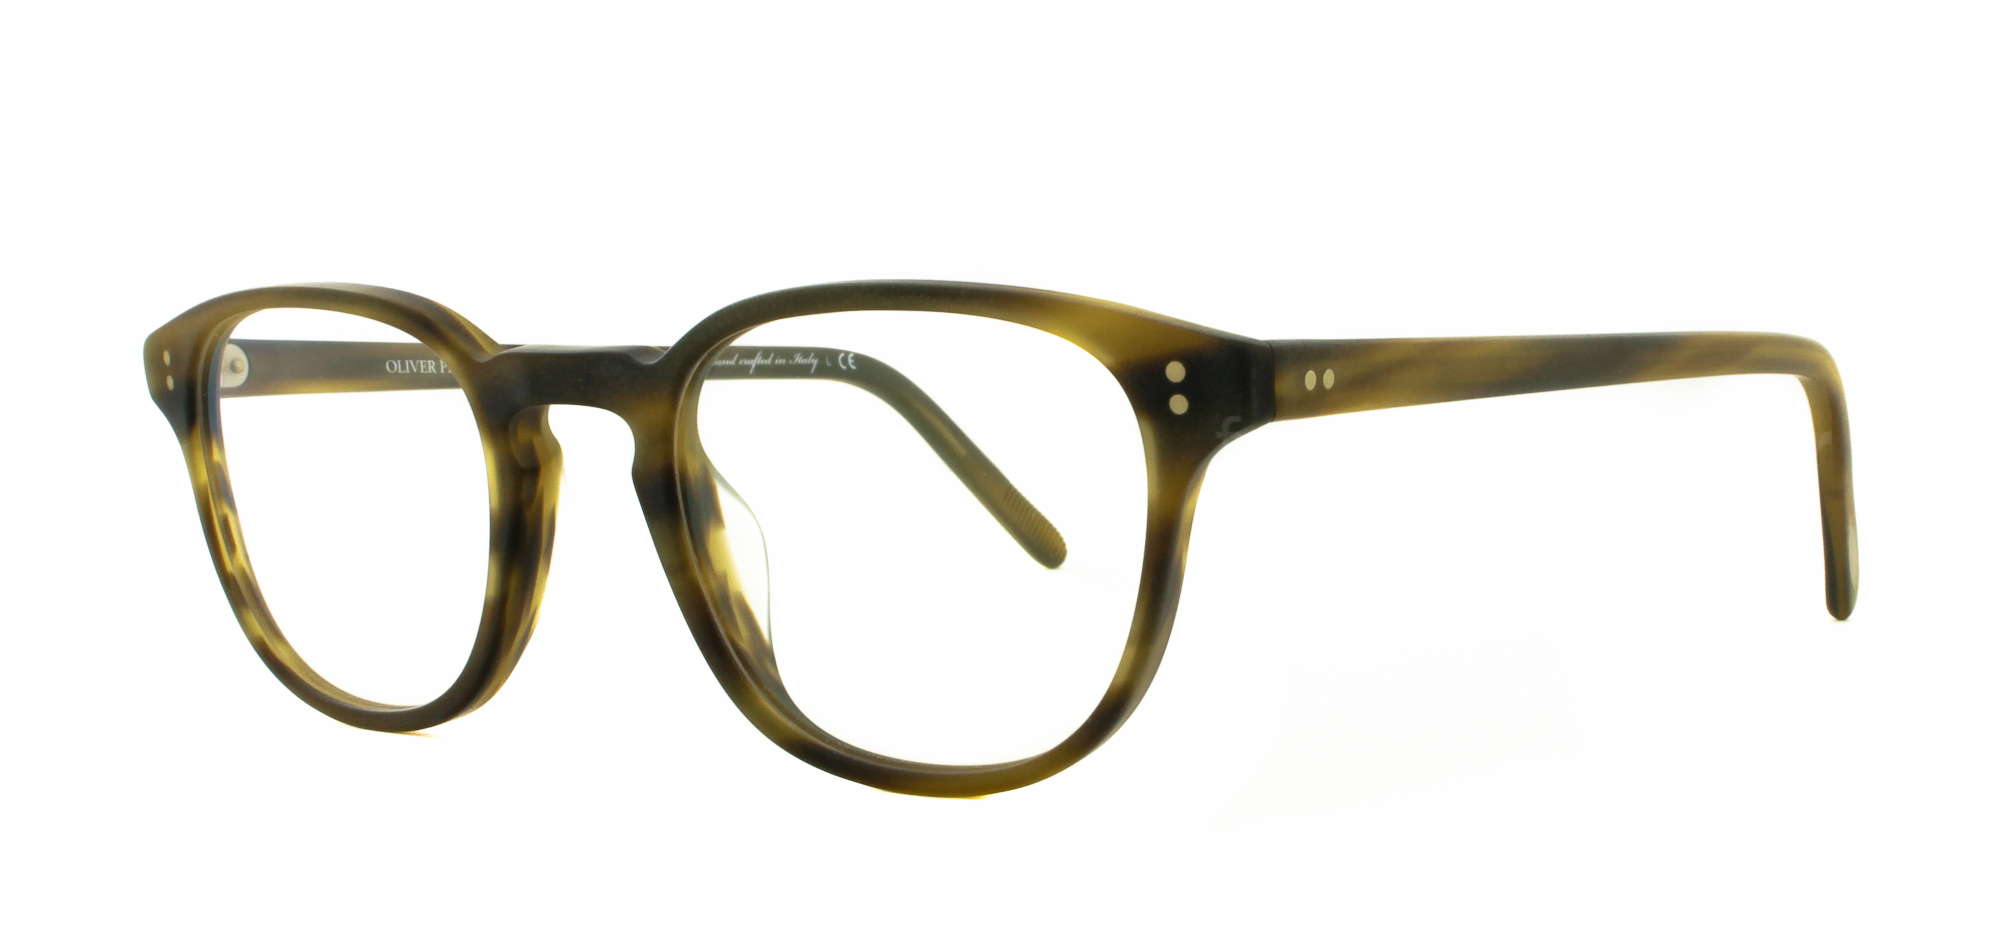 OLIVER PEOPLES FAIRMONT 1318